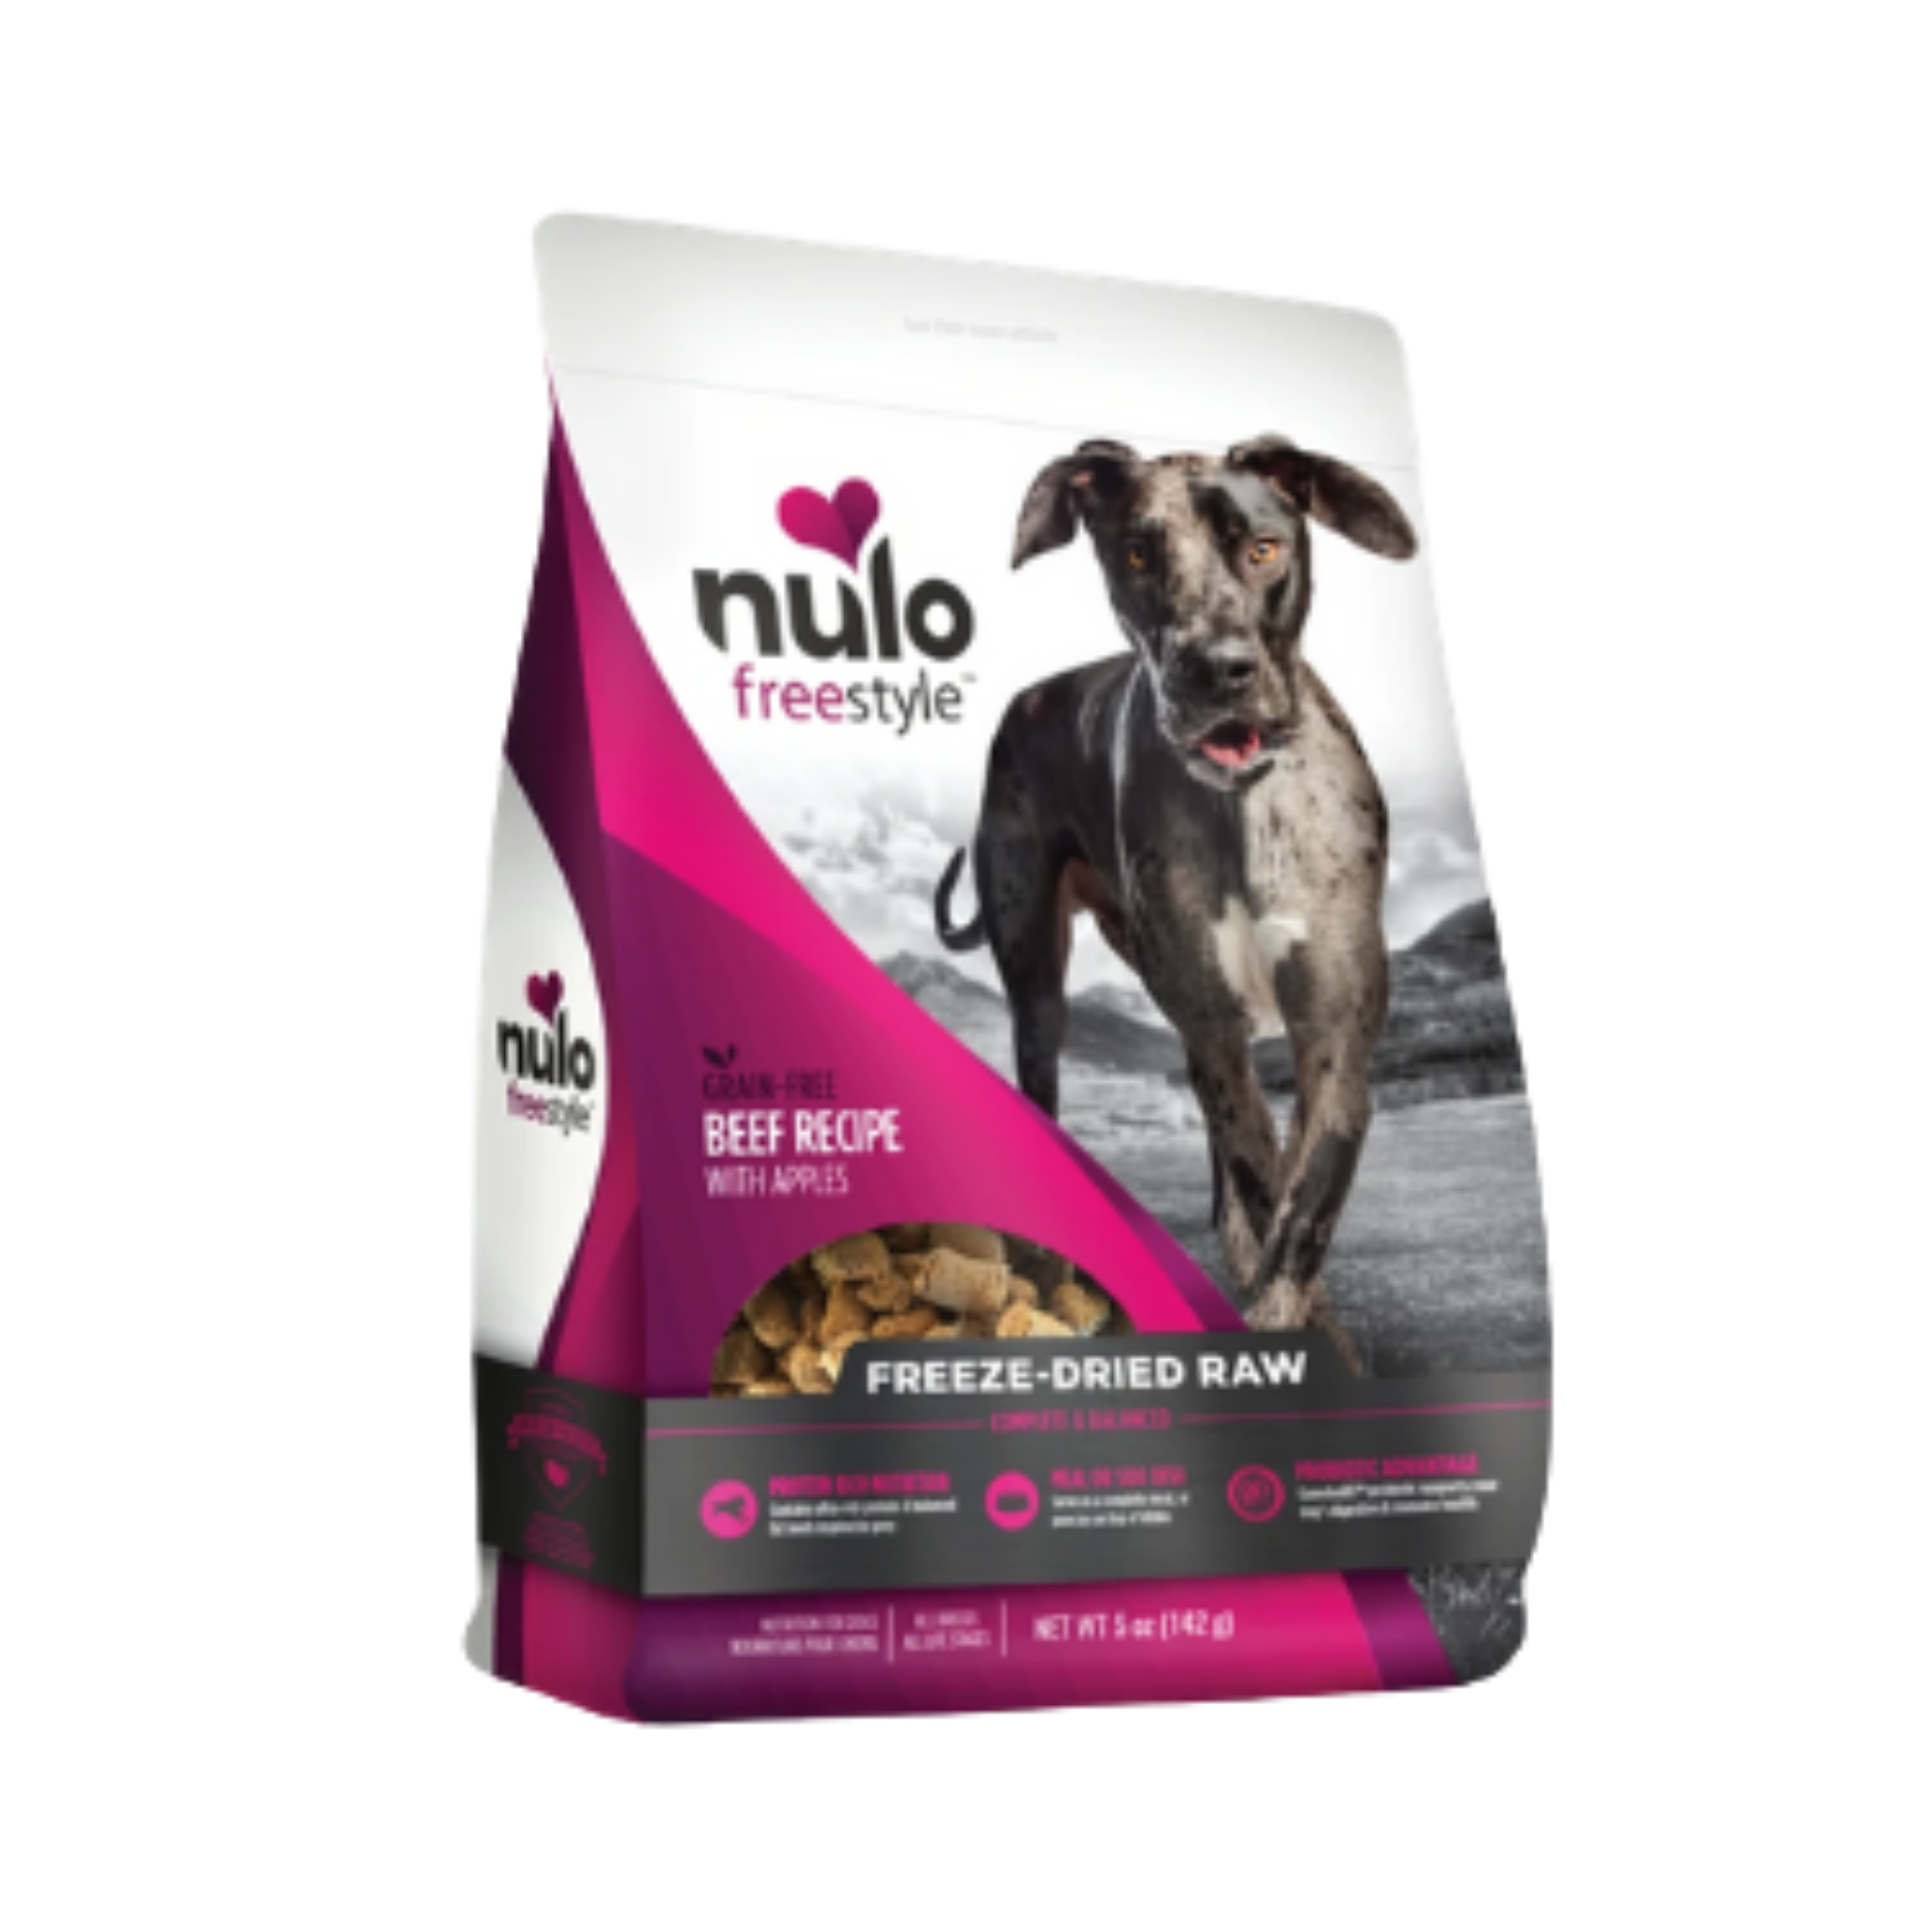 Nulo Freestyle Grain-Free Beef with Apples Recipe Freeze-Dried Dog Food - Mutts & Co.